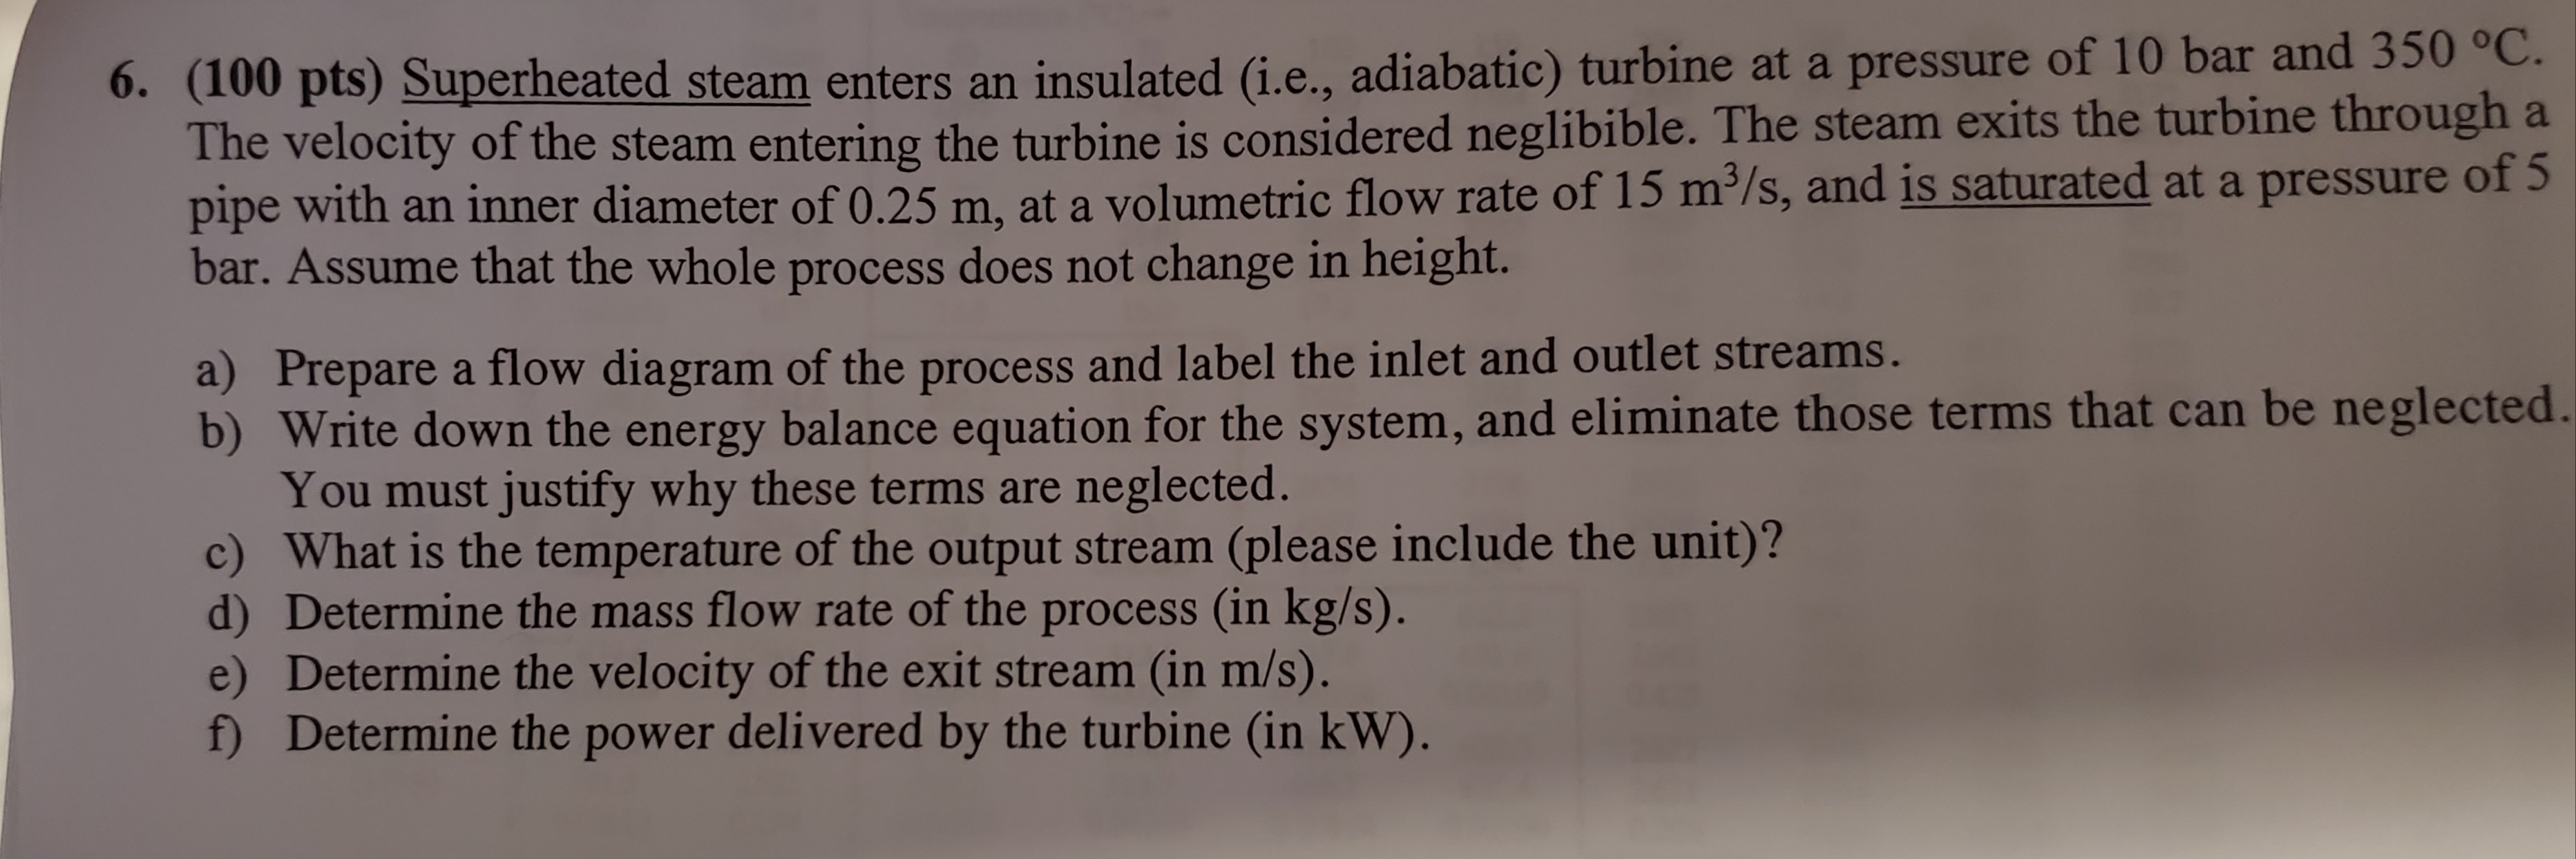 6. (100 pts) Superheated steam enters an insulated (i.e., adiabatic) turbine at a pressure of 10 bar and 350 °C.
The velocity of the steam entering the turbine is considered neglibible. The steam exits the turbine through a
pipe with an inner diameter of 0.25 m, at a volumetric flow rate of 15 m³/s, and is saturated at a pressure of 5
bar. Assume that the whole process does not change in height.
a) Prepare a flow diagram of the process and label the inlet and outlet streams.
b) Write down the energy balance equation for the system, and eliminate those terms that can be neglected.
You must justify why these terms are neglected.
c) What is the temperature of the output stream (please include the unit)?
d) Determine the mass flow rate of the process (in kg/s).
e) Determine the velocity of the exit stream (in m/s).
f) Determine the power delivered by the turbine (in kW).
